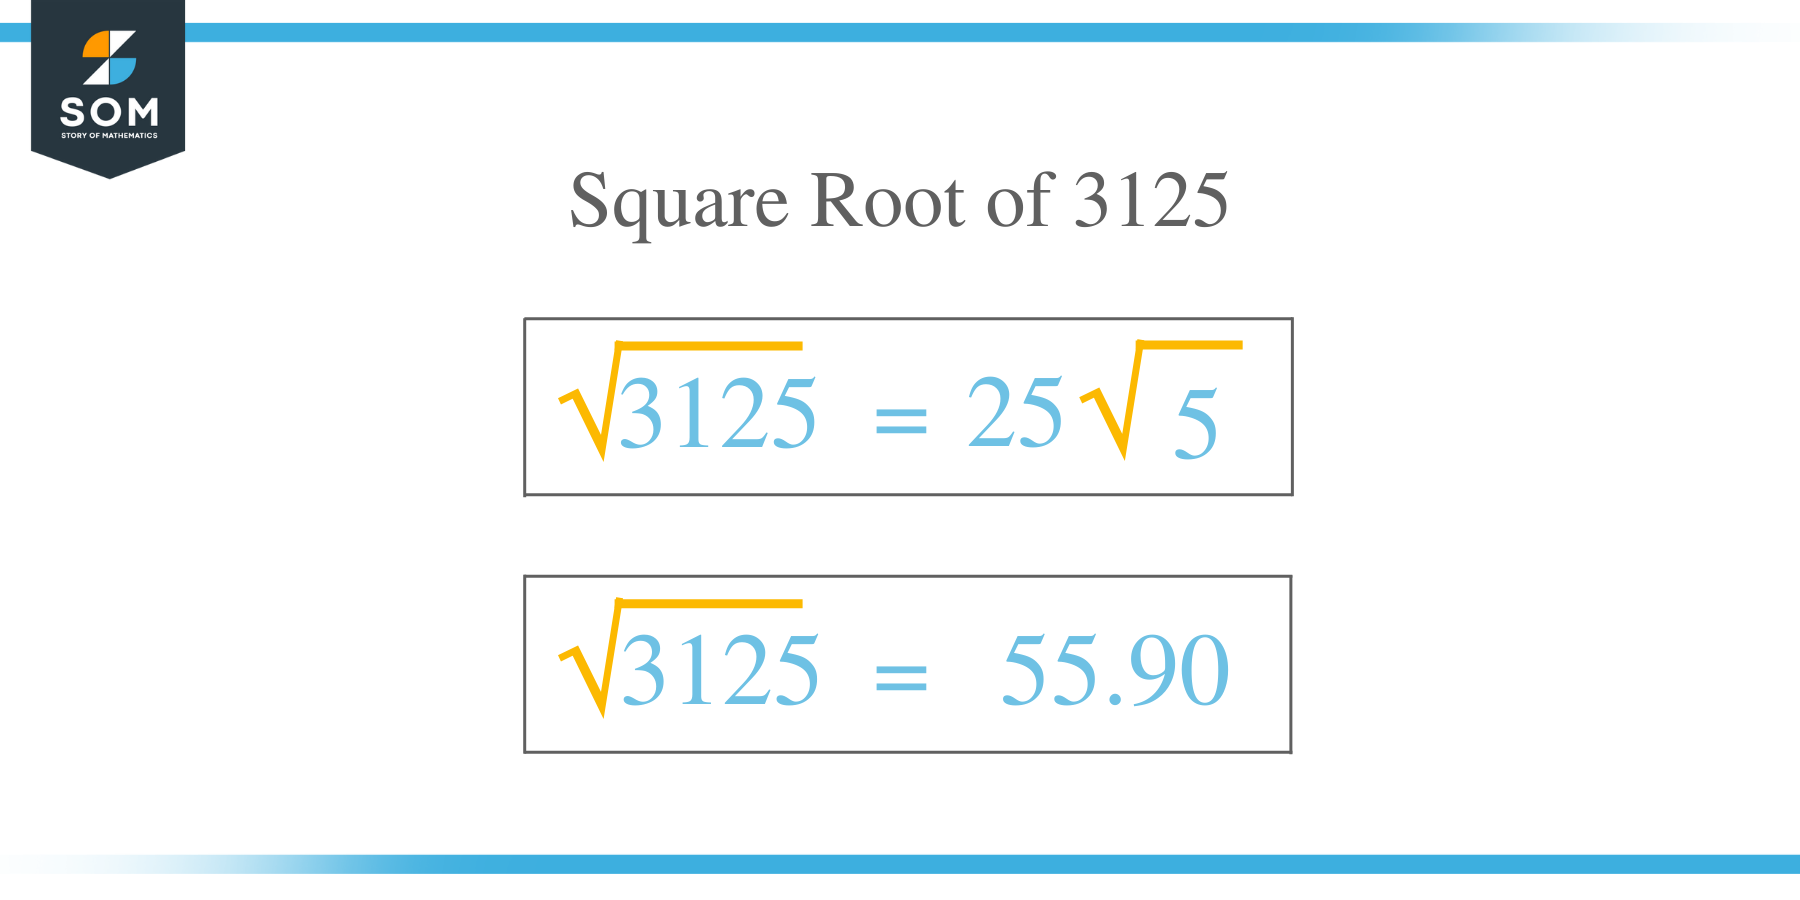 Square Root of 3125